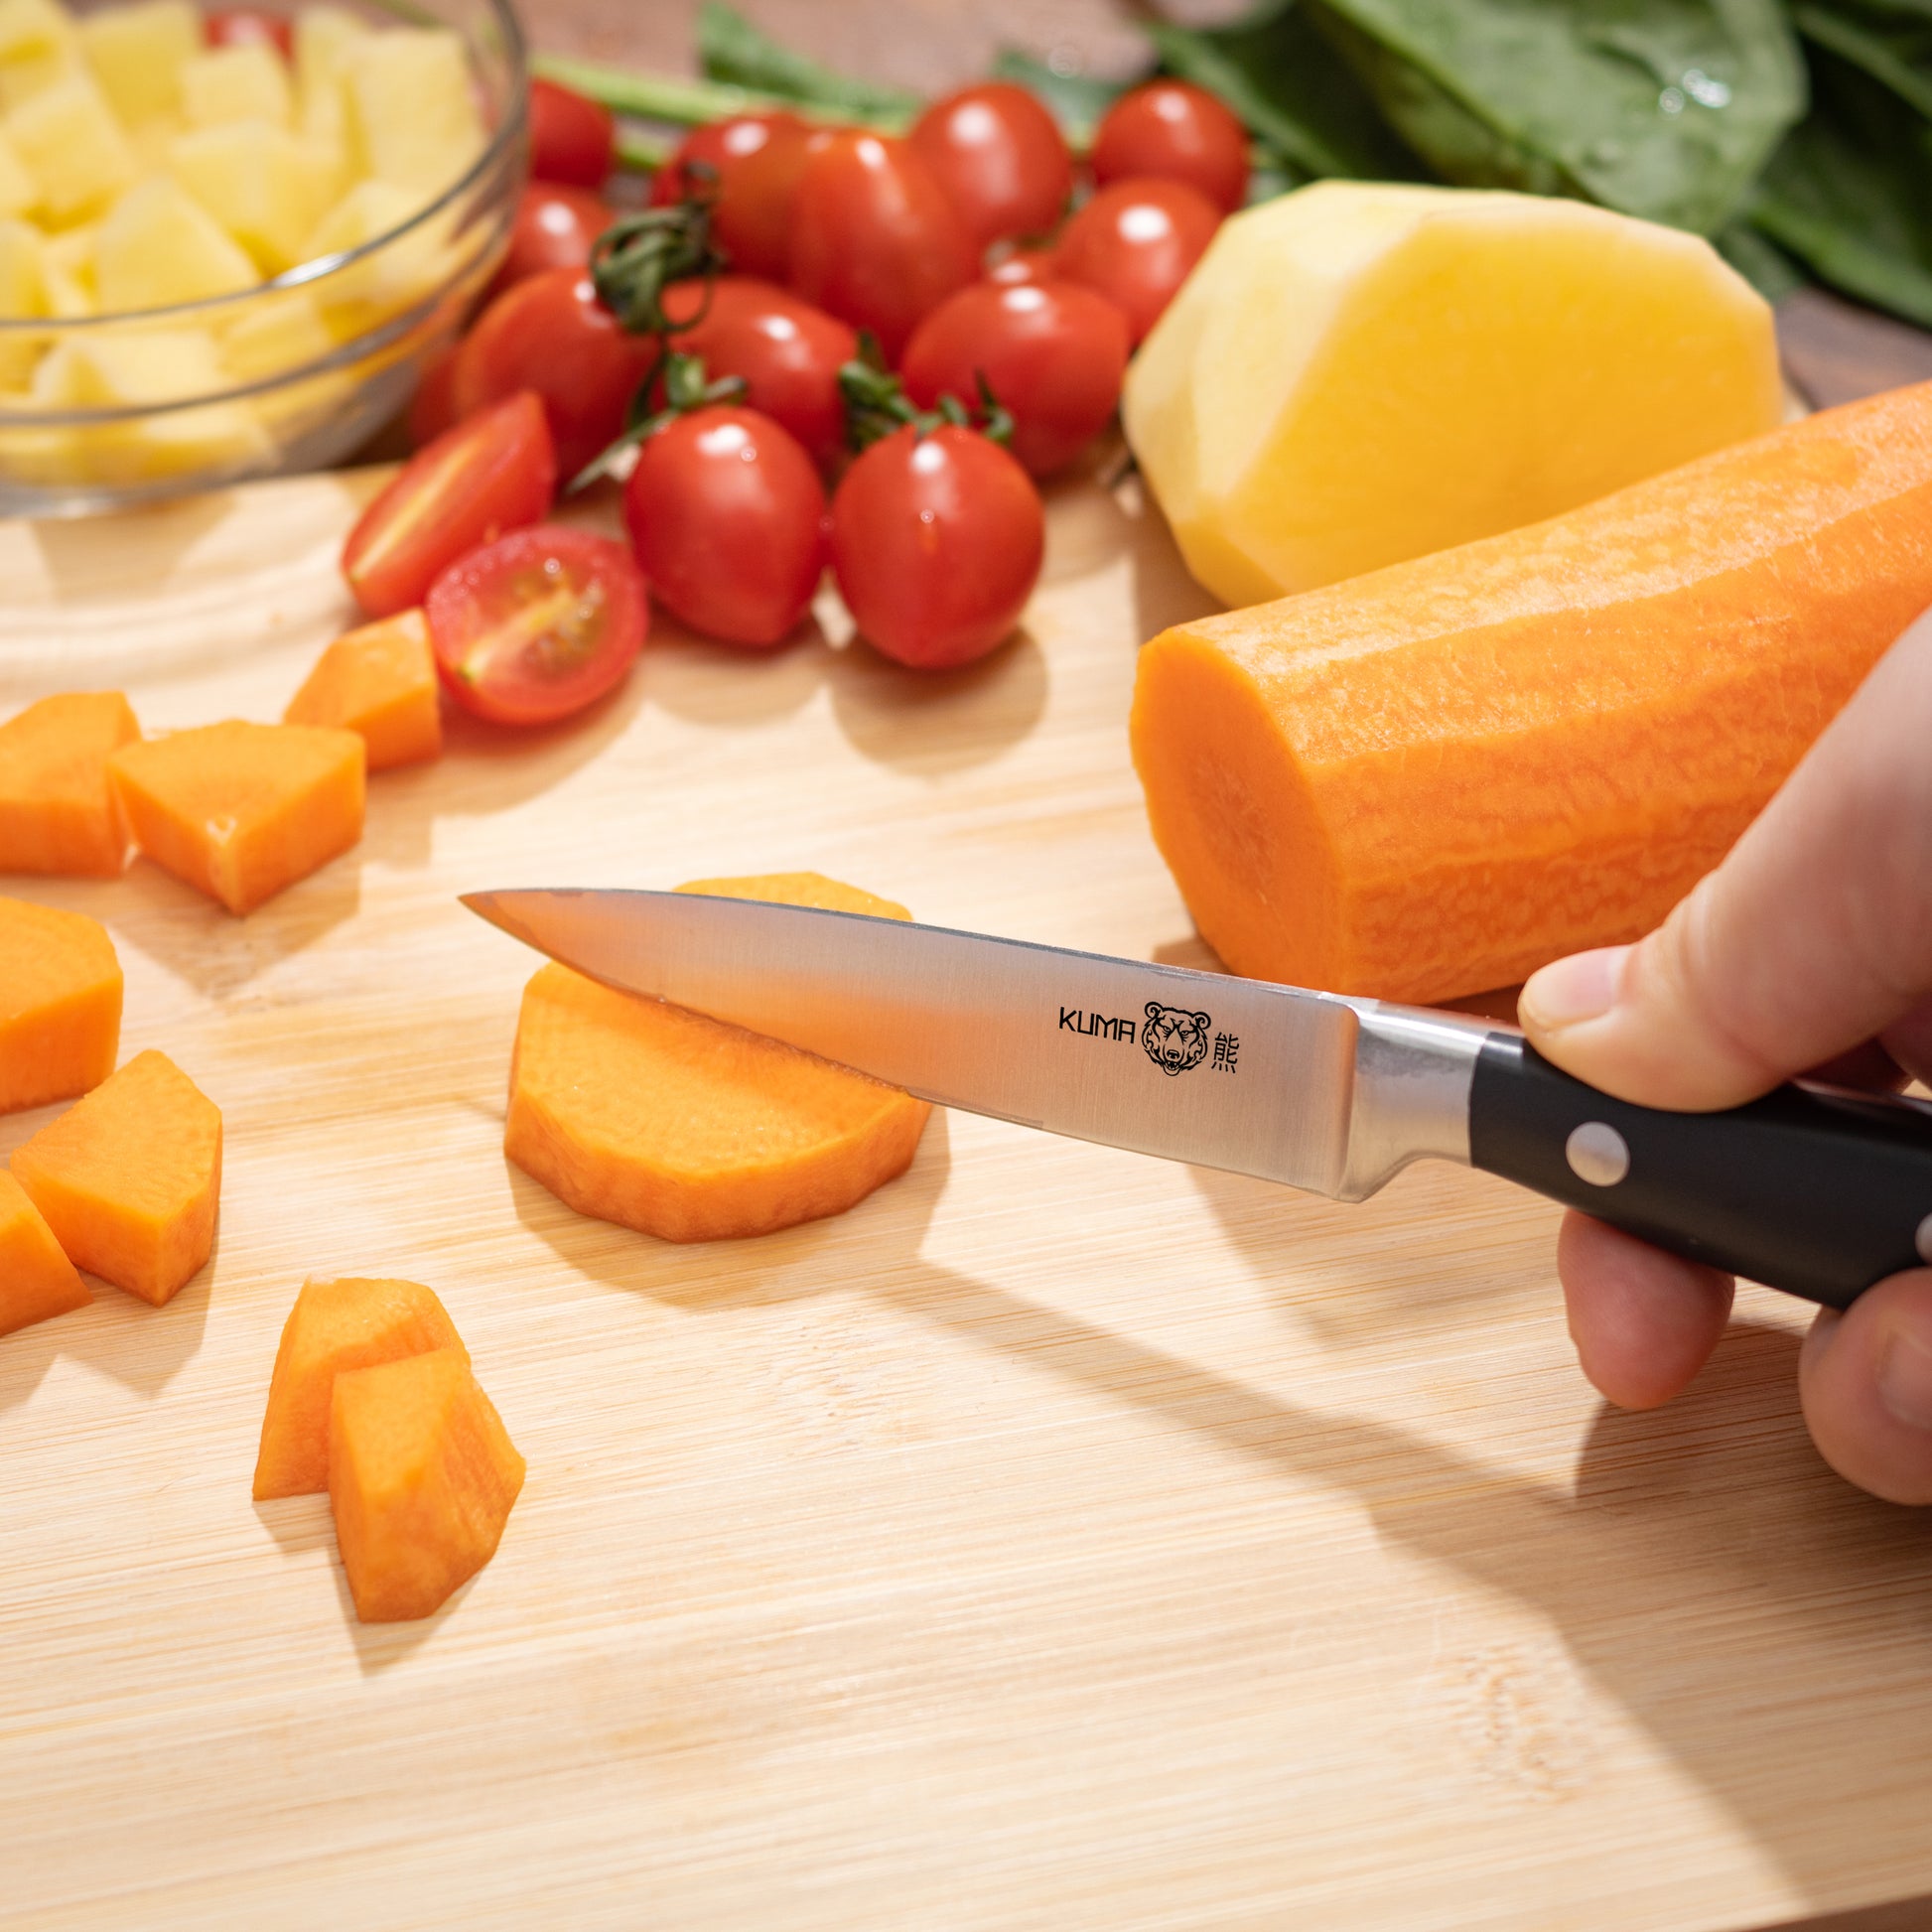 Kitchen + Home Paring Knife – 2.5” Ultra Sharp Surgical Stainless